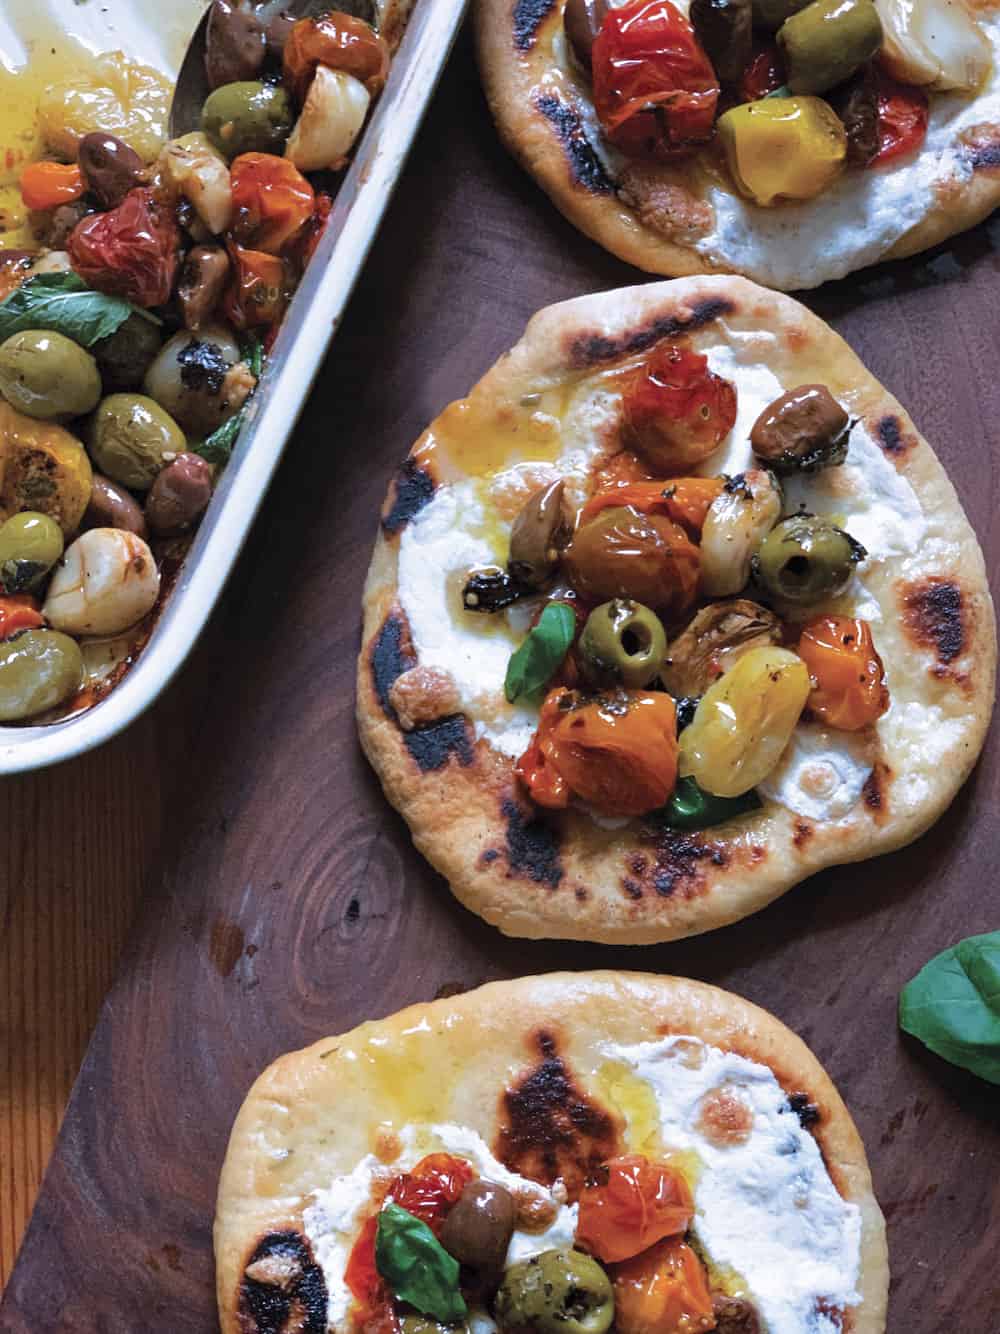 Roasted tomato & olives appetizer on a pita bread.